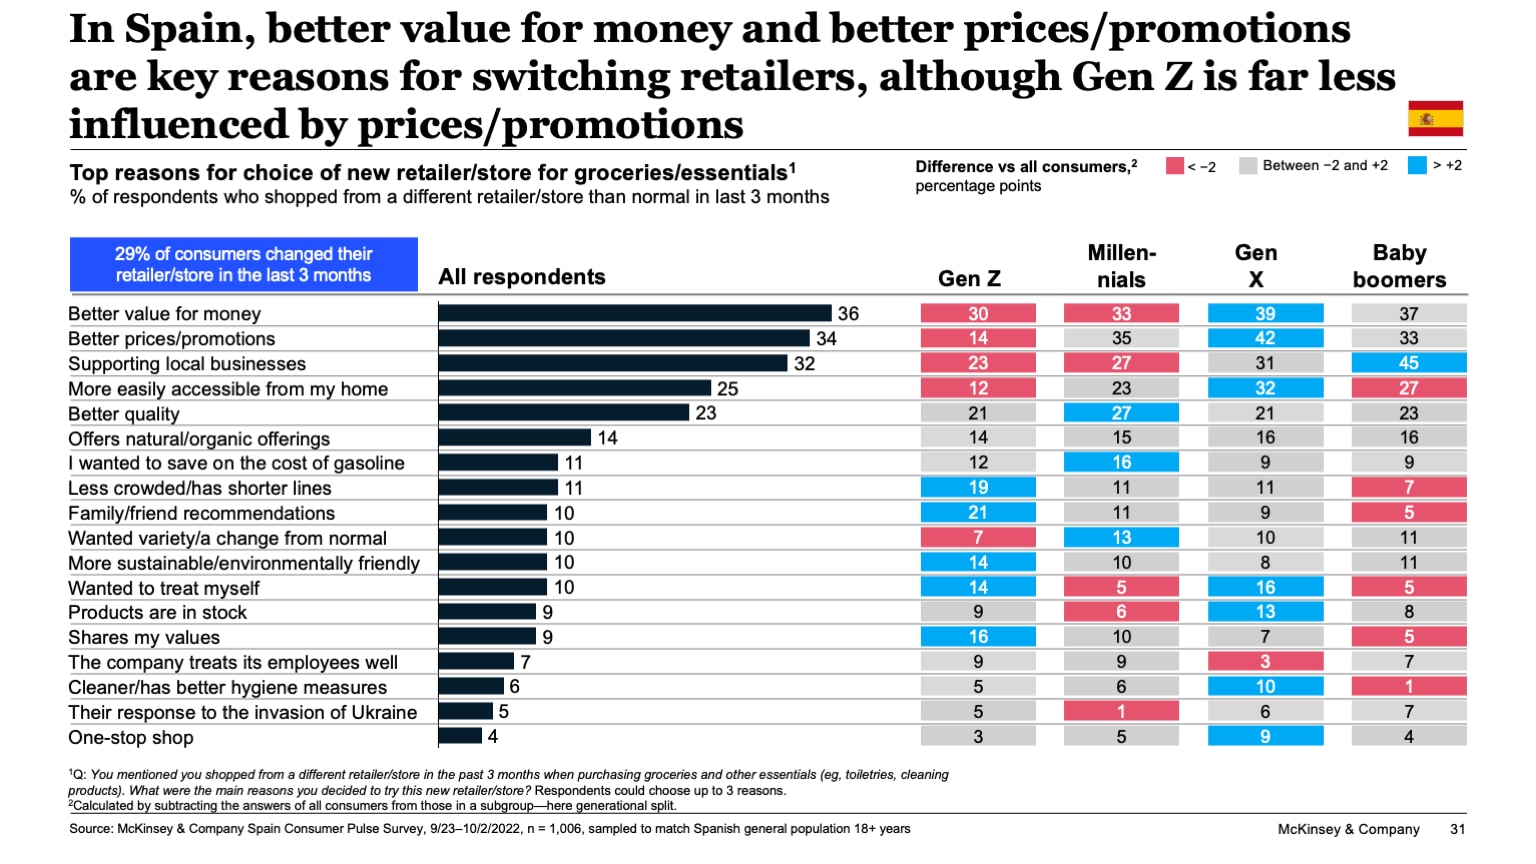 In Spain, better value for money and better prices/promotions are key reasons for switching retailers, although Gen Z is far less influenced by prices/promotions